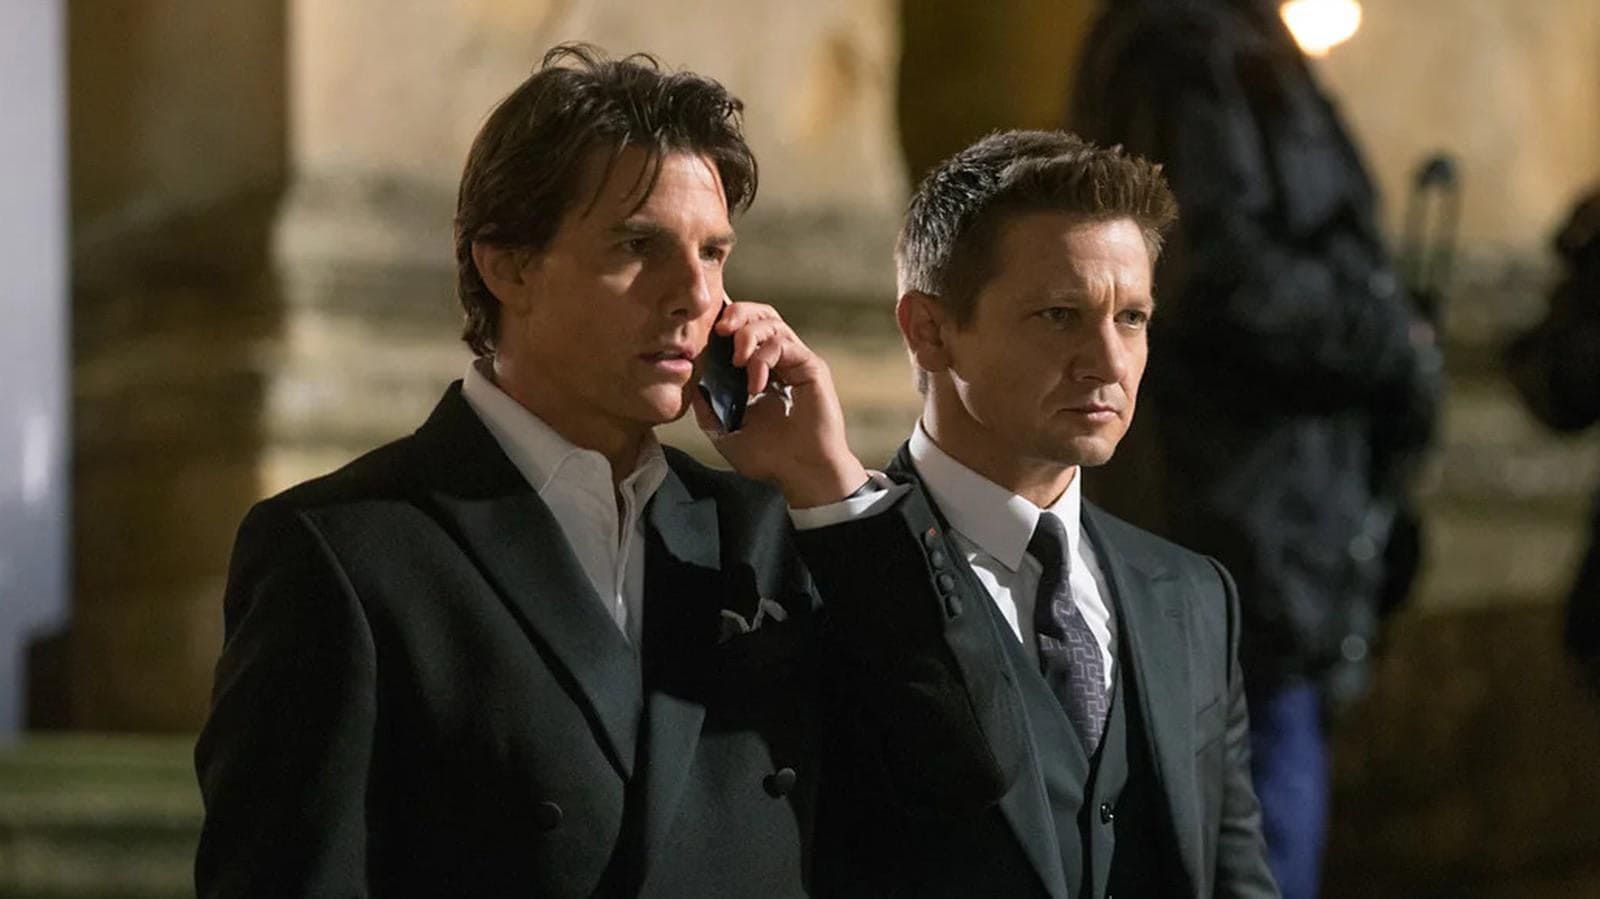 Jeremy Renner Reveals Why He Left Mission: Impossible to Focus on Family